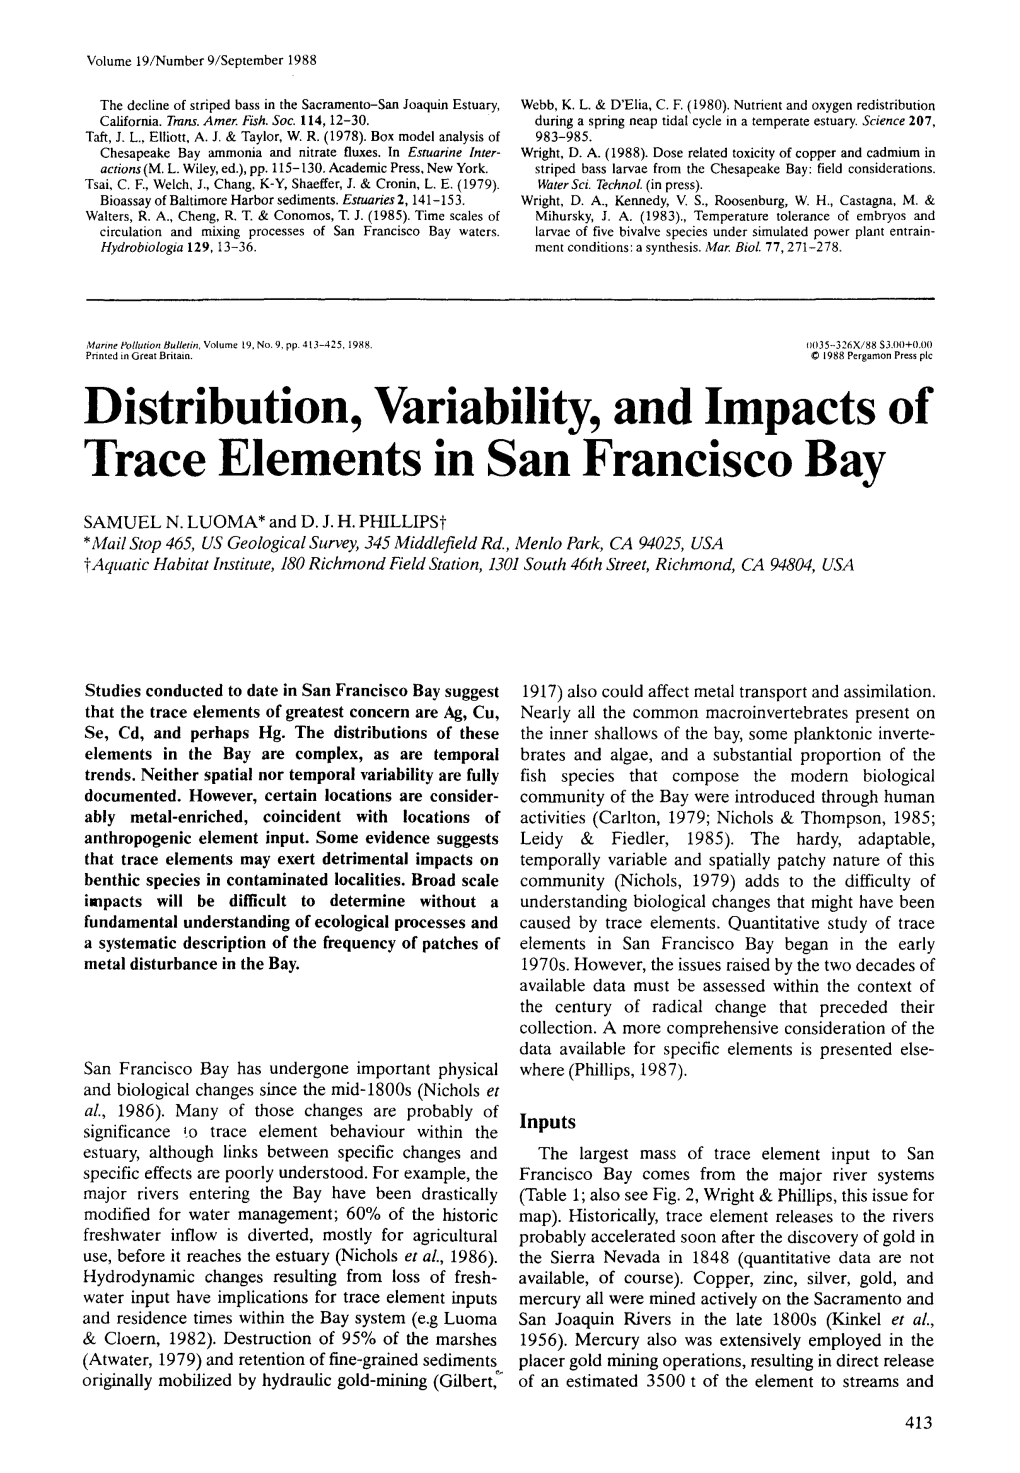 Distribution, Variability, and Impacts of Trace Elements in San Francisco Bay